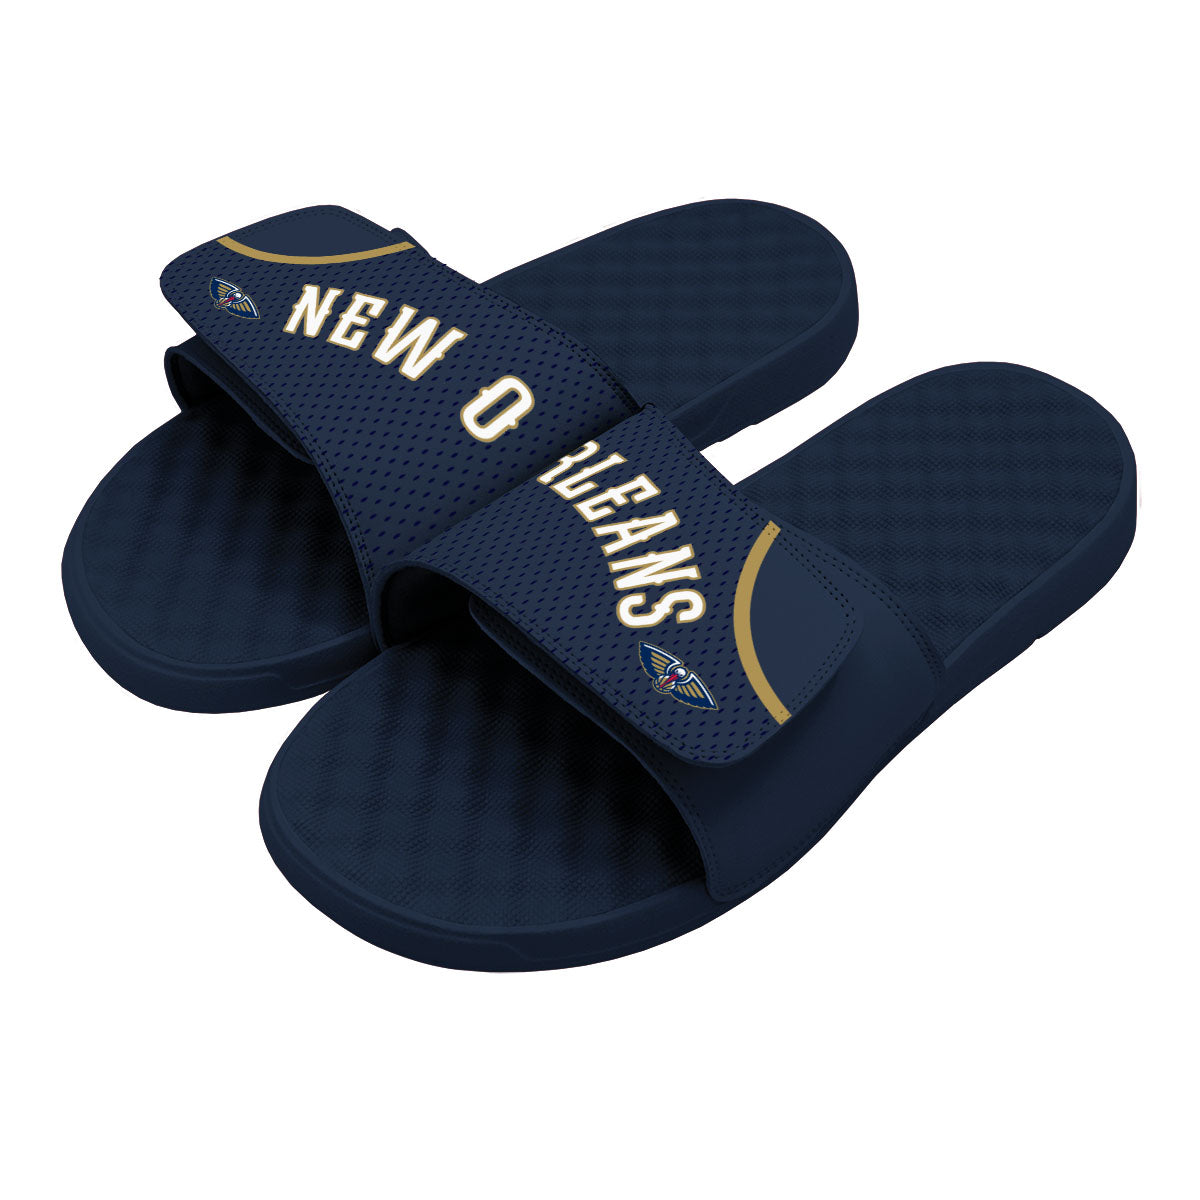 New Orleans Pelicans Away Jersey Slides